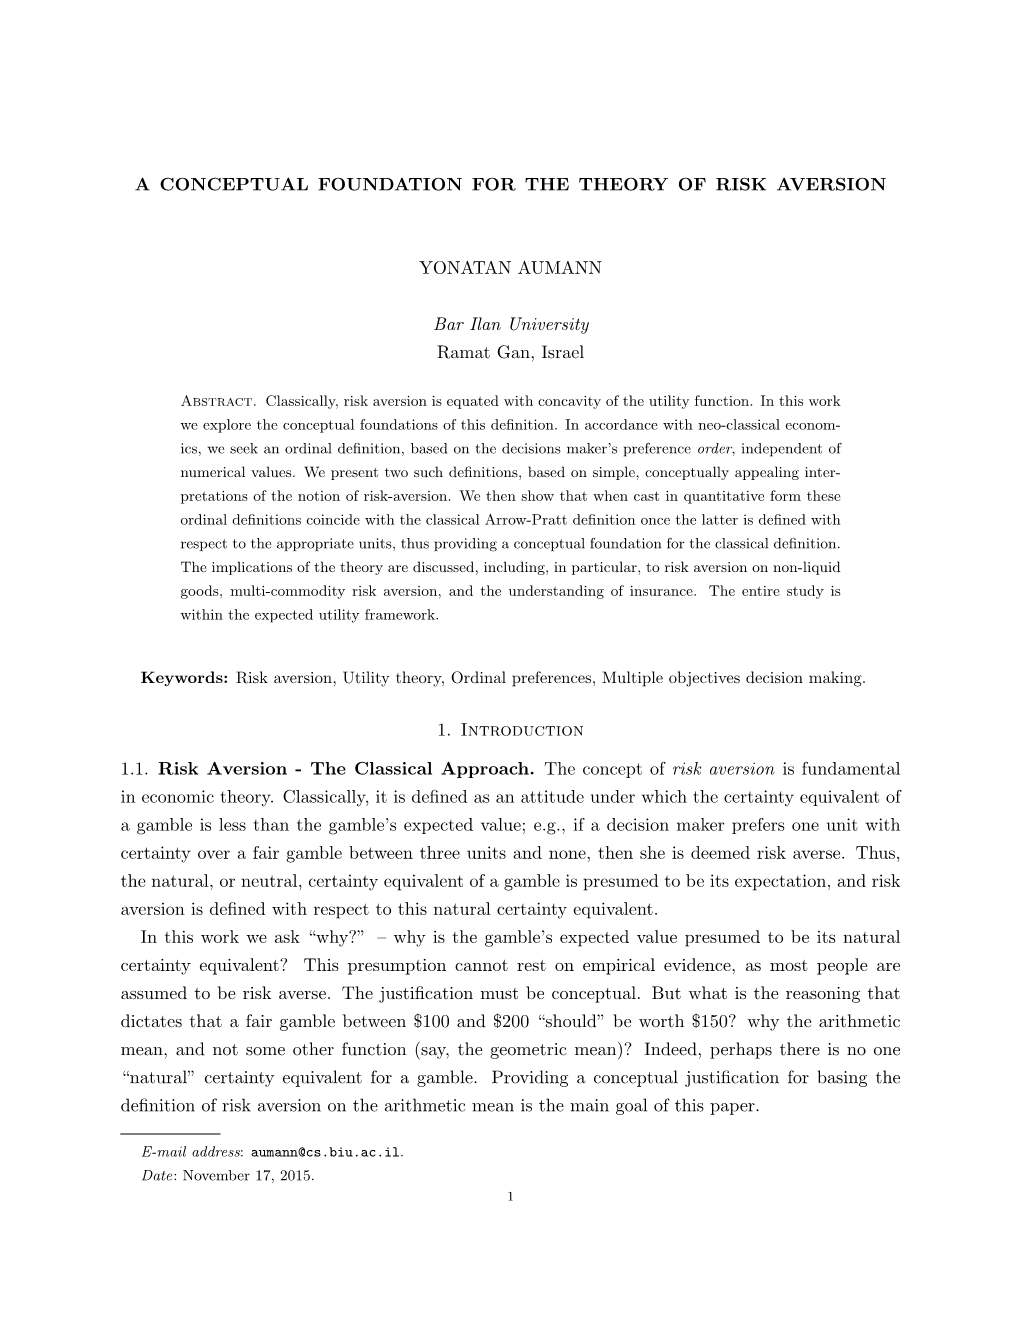 A Conceptual Foundation for the Theory of Risk Aversion